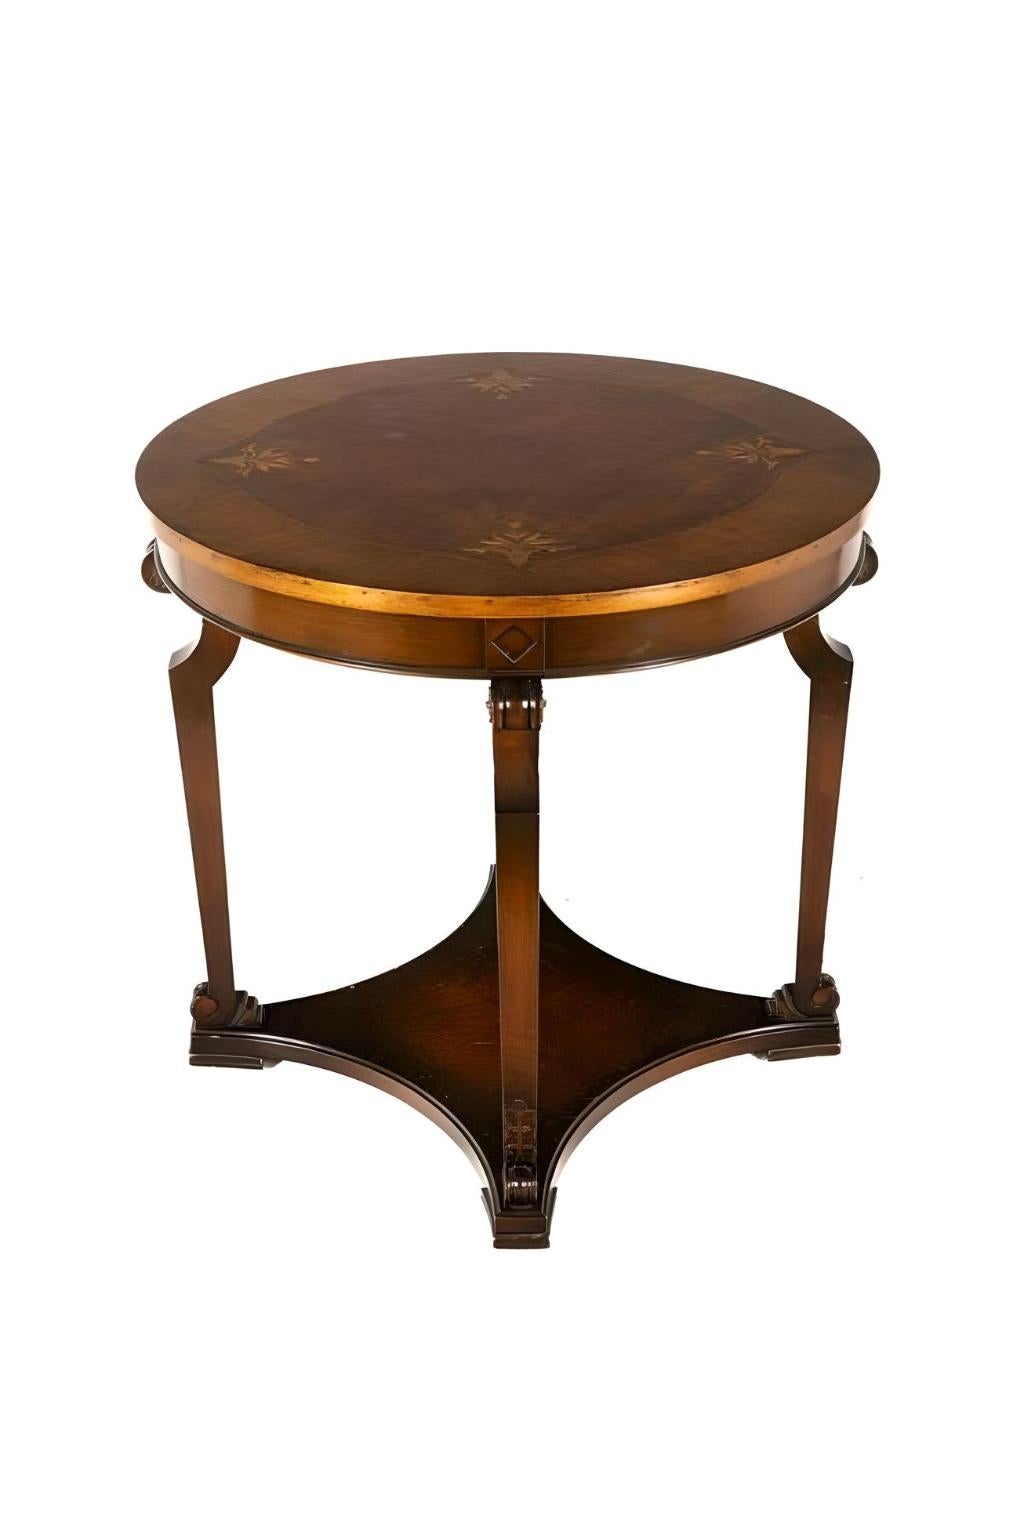 Canadian Parquetry Inlay Circular Hall Table For Sale